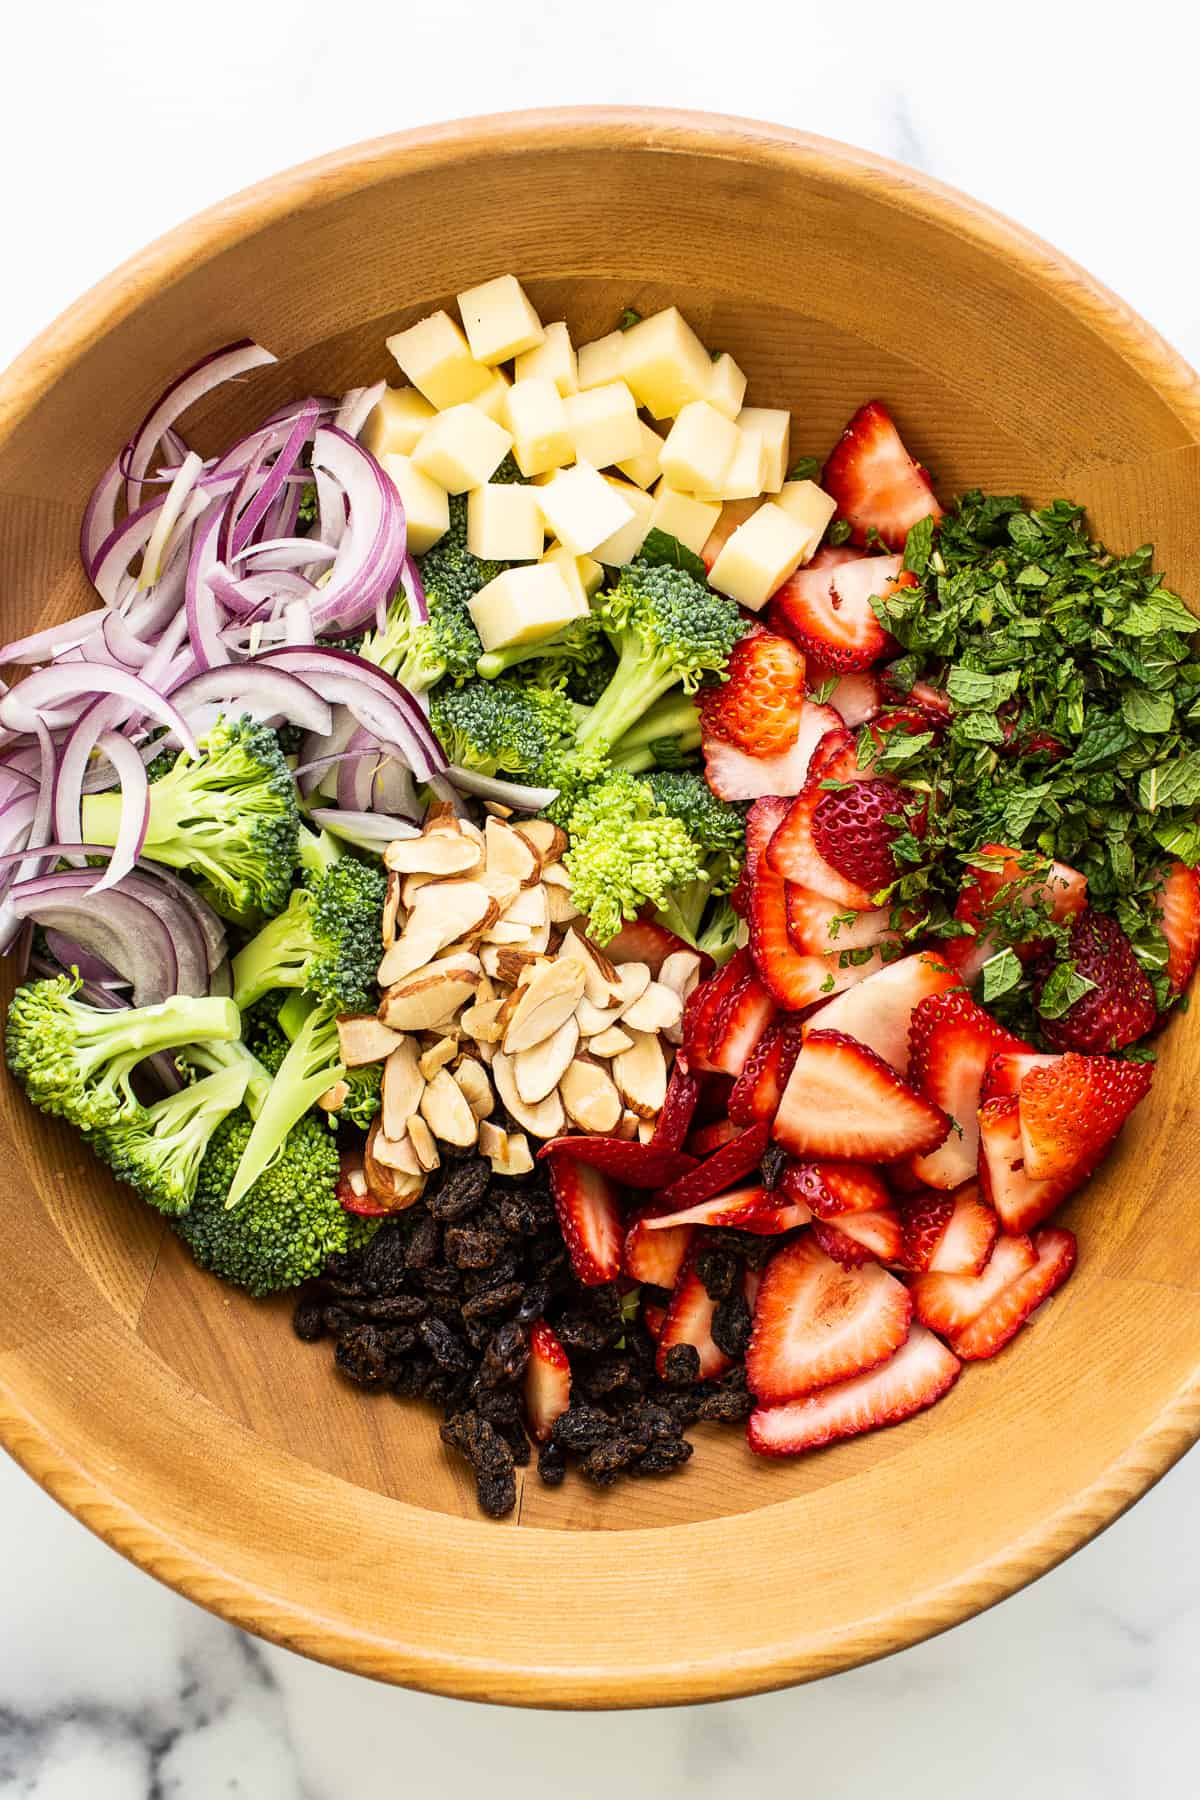 Ingredients for strawberry broccoli salad in a large wooden bowl.